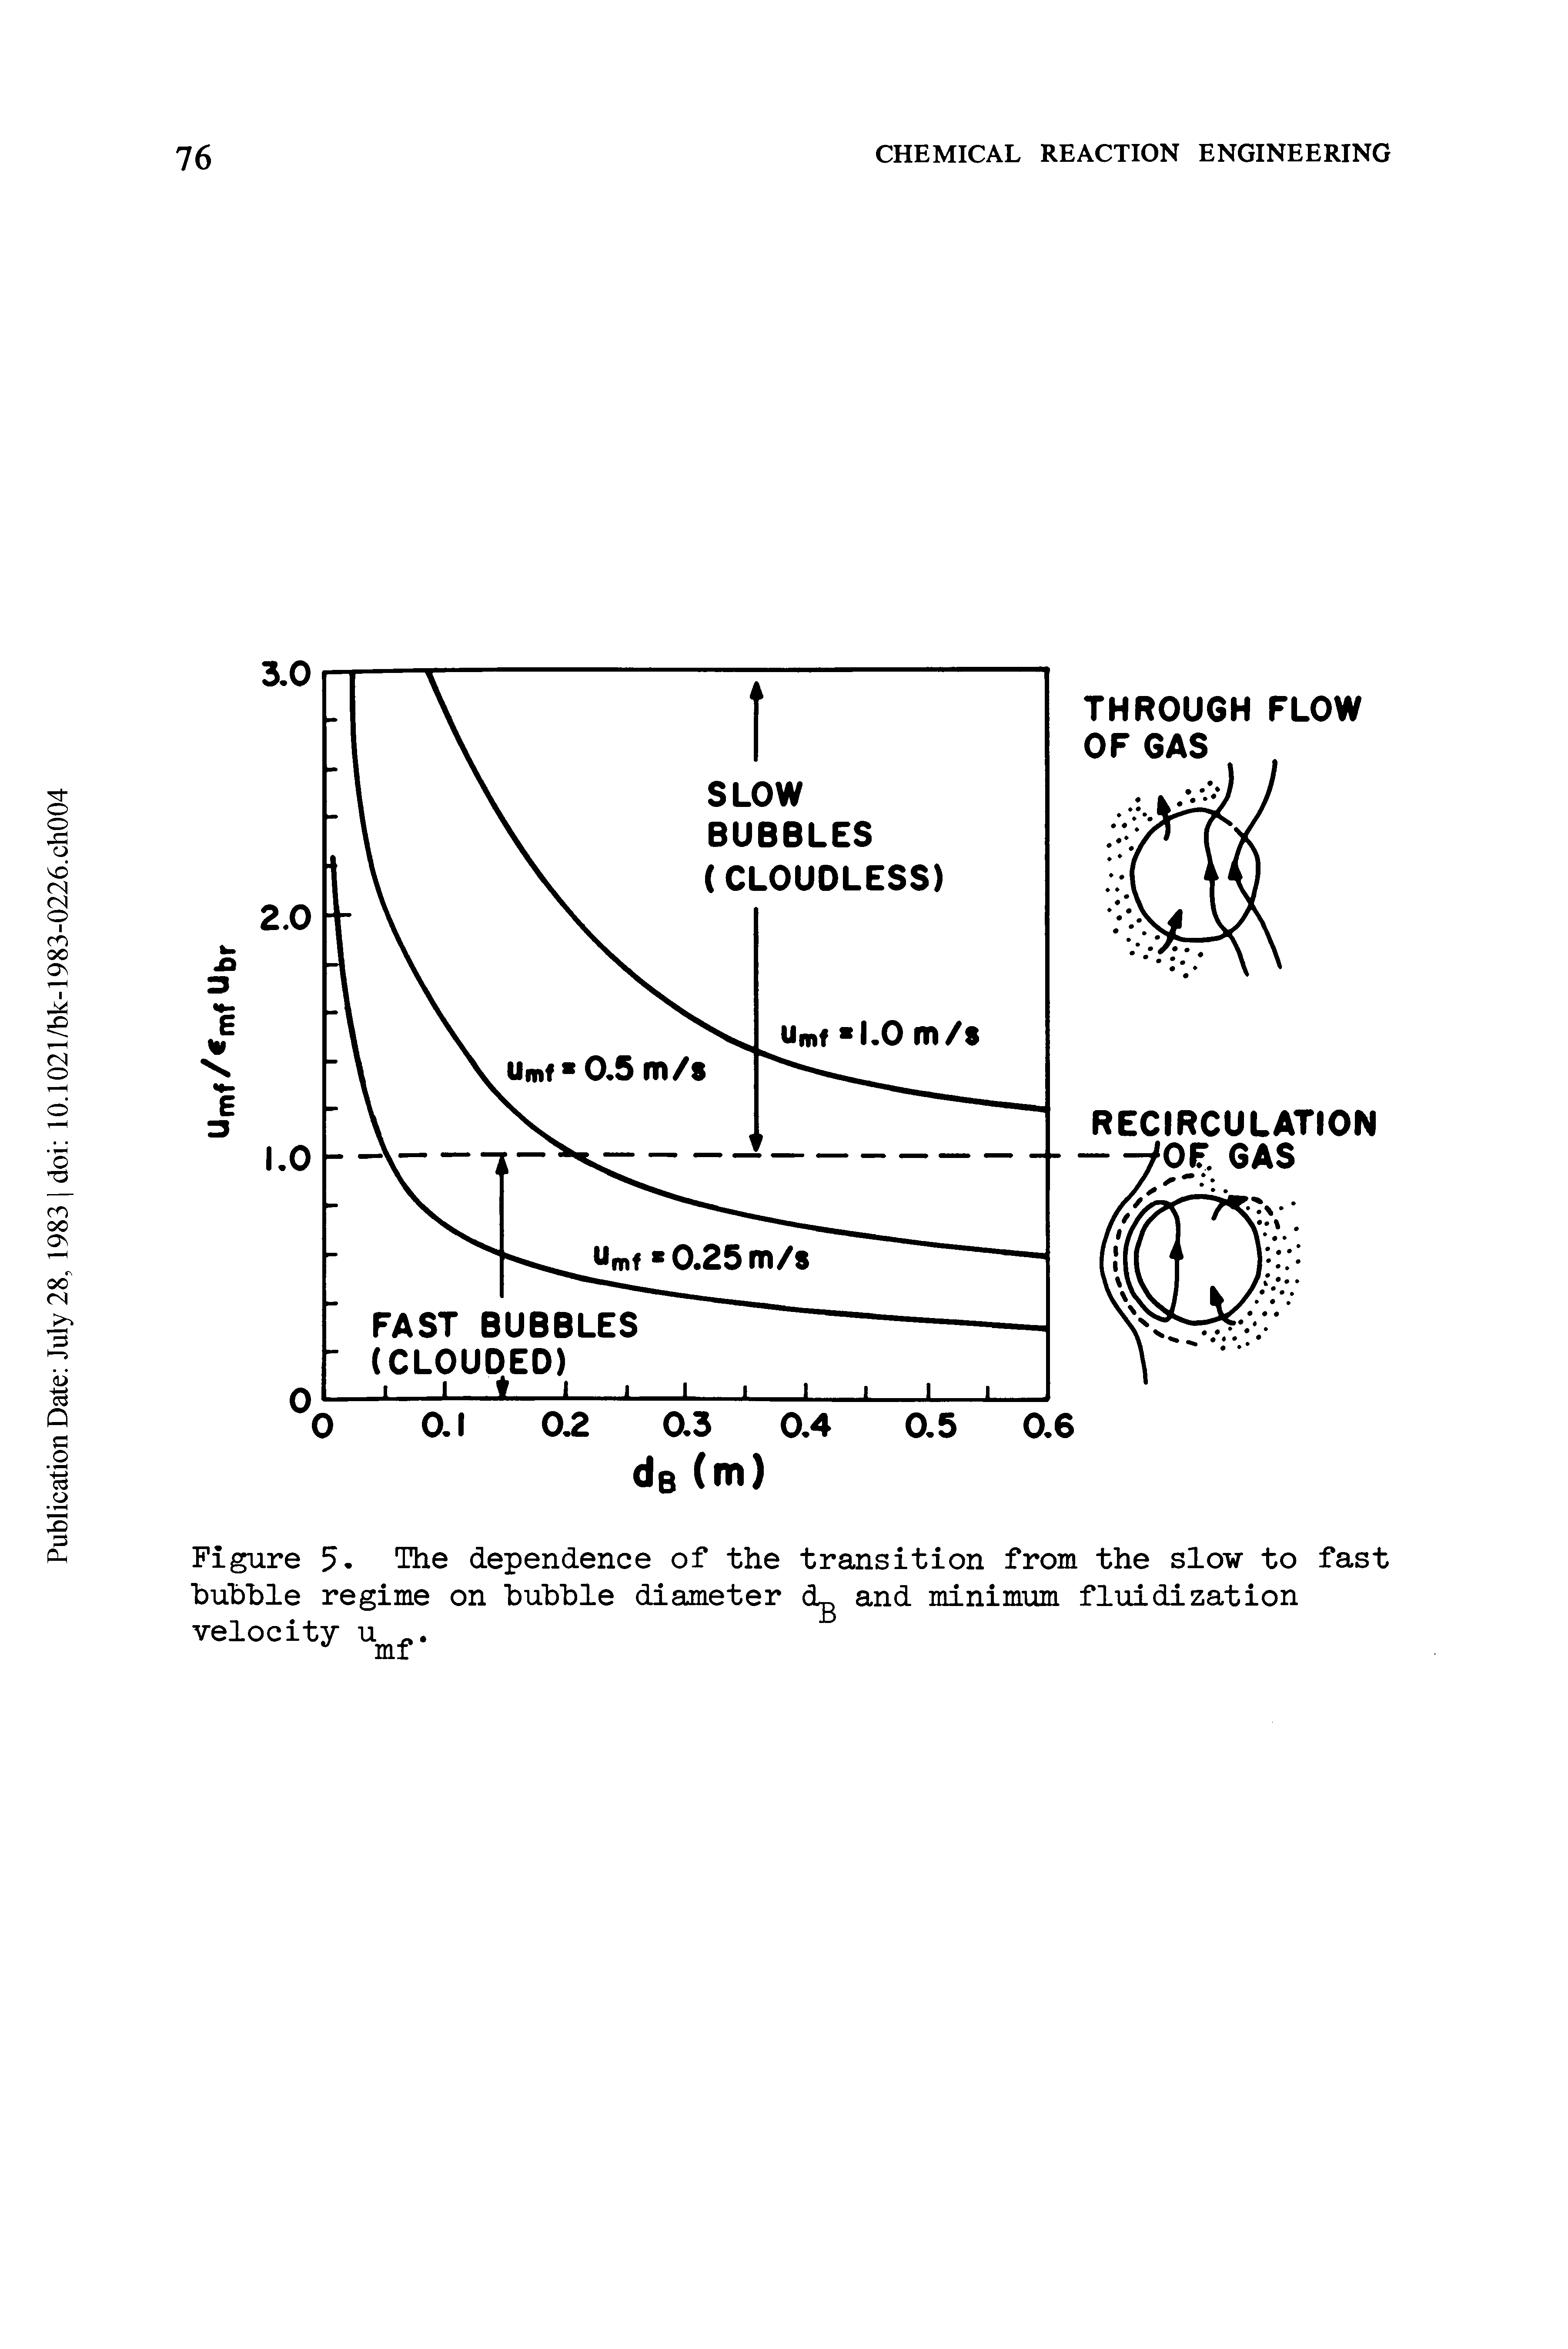 Figure 5. The dependence of the transition from the slow to fast bubble regime on bubble diameter dg and minimum fluidization velocity umf.